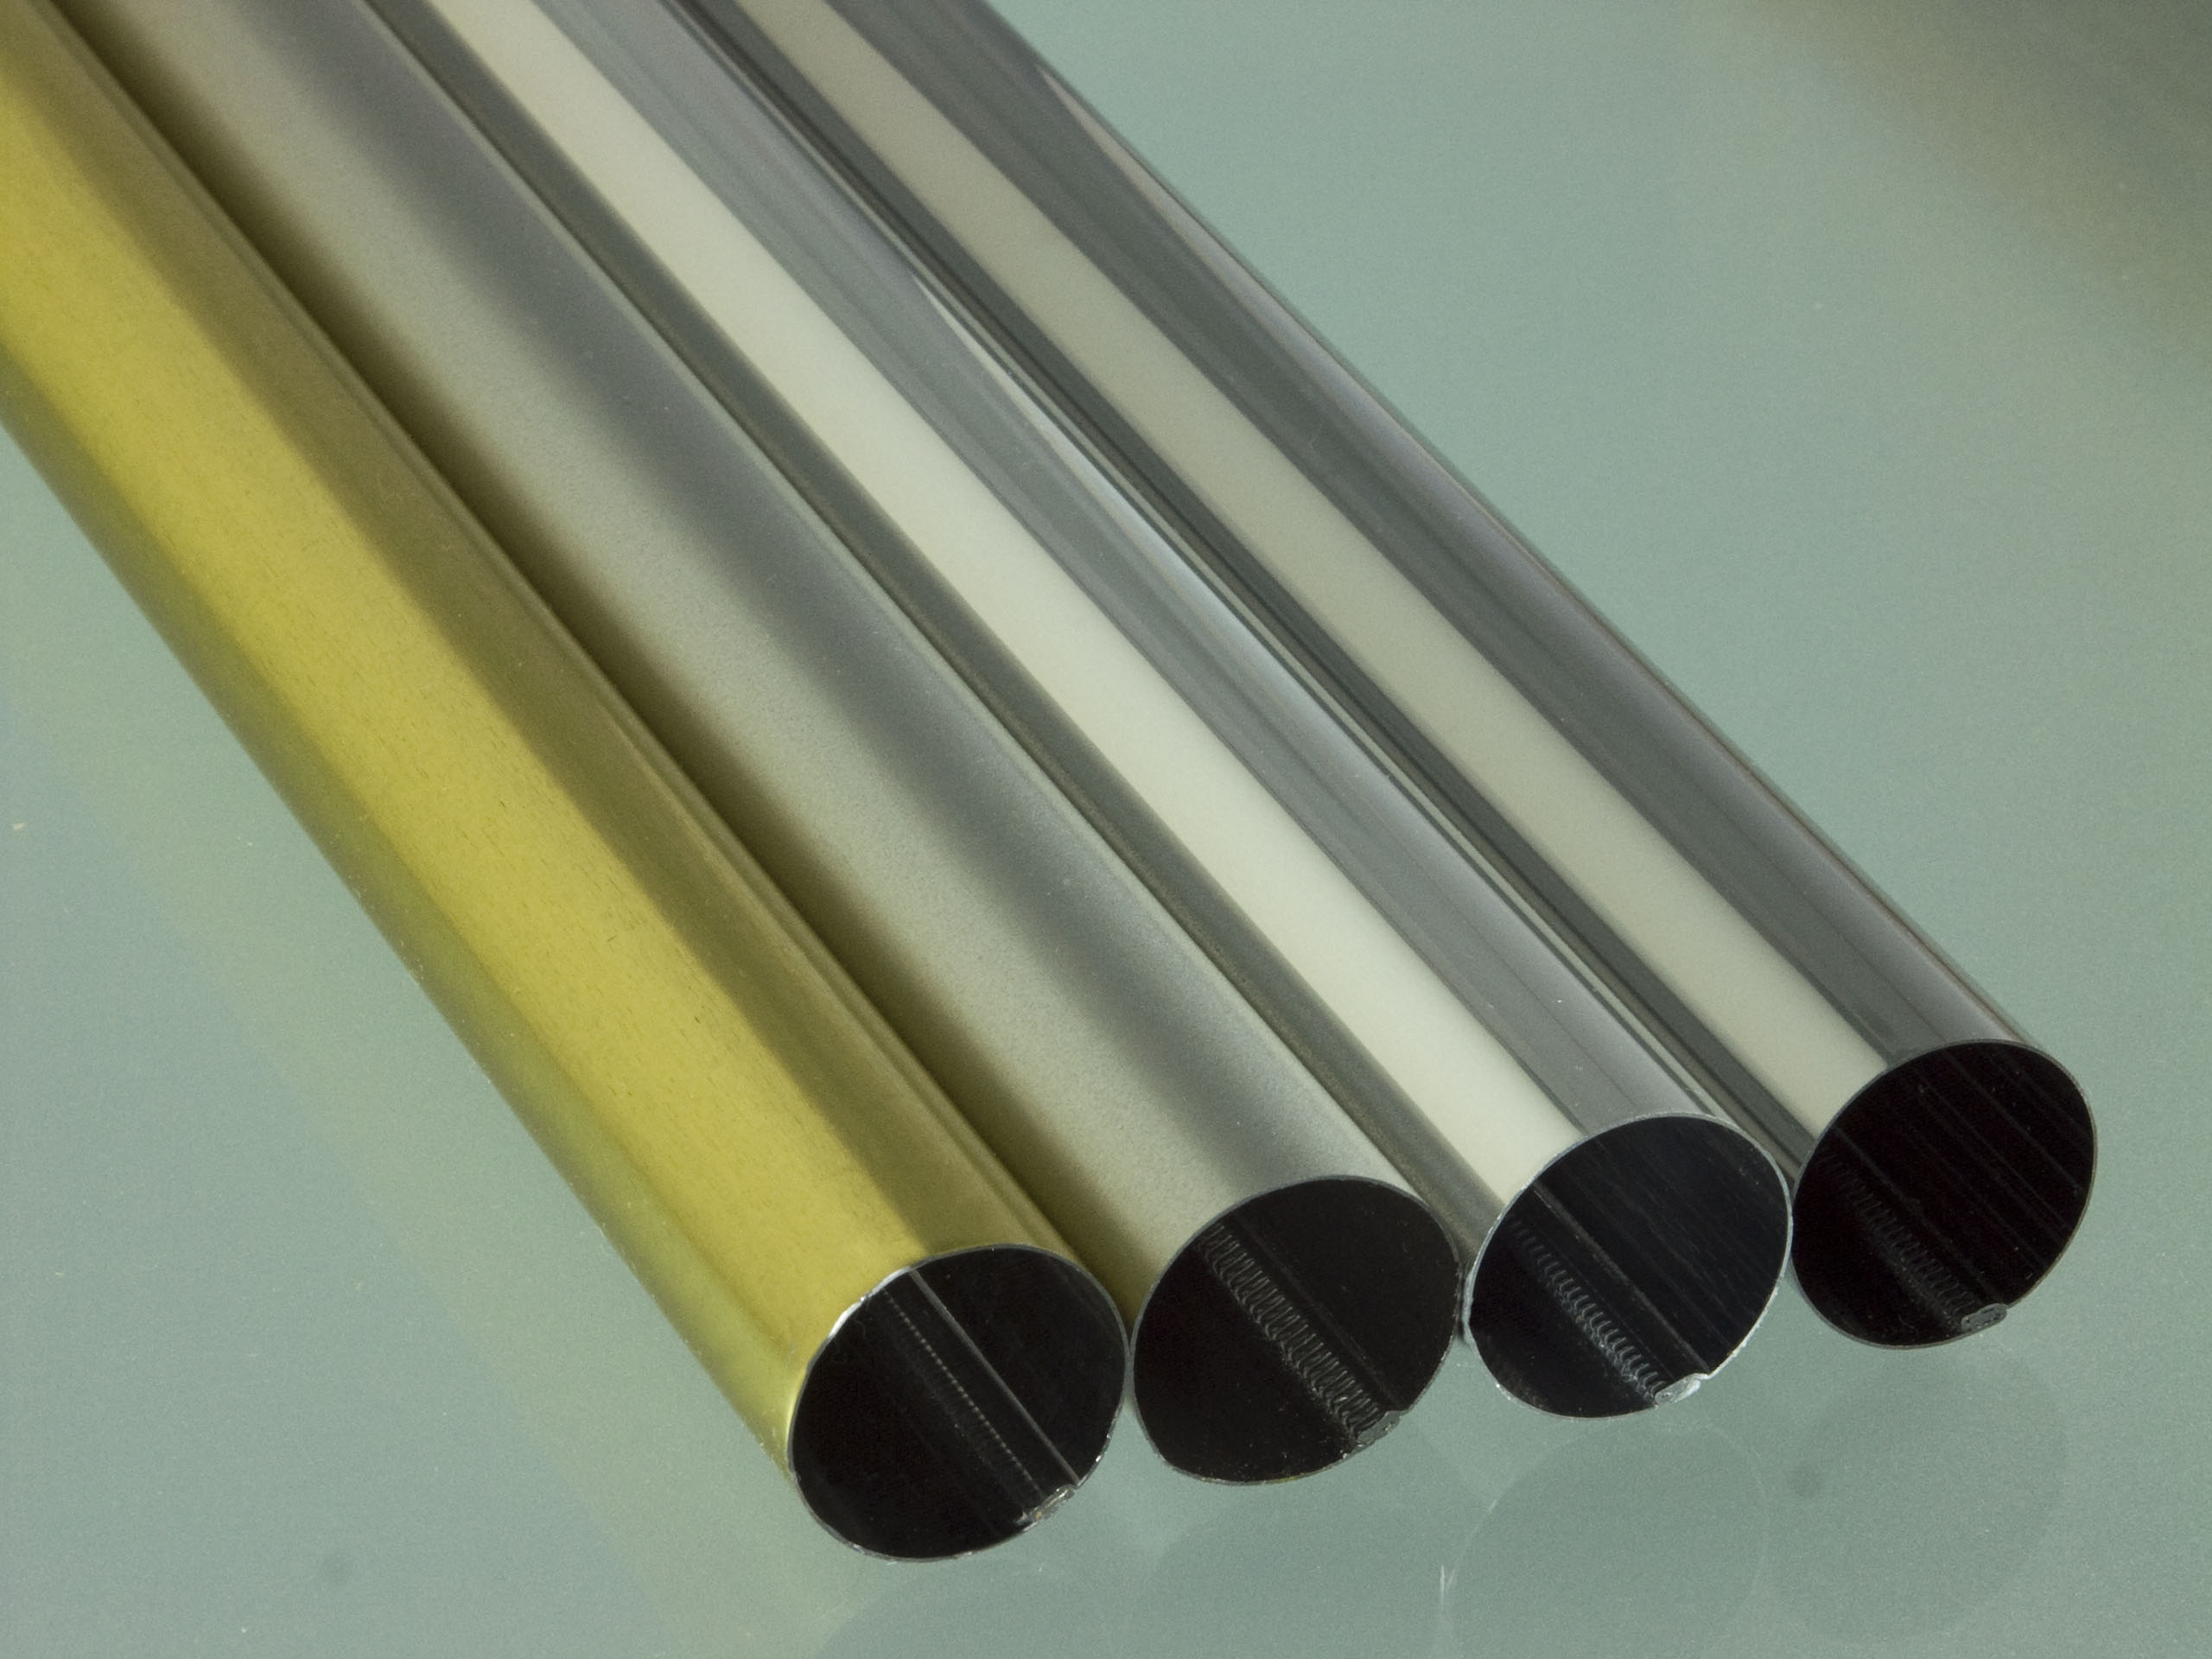 Roller Tubes: Awning, Canopy, Tarp, Curtain, Map, Projection Screen, Shutte...